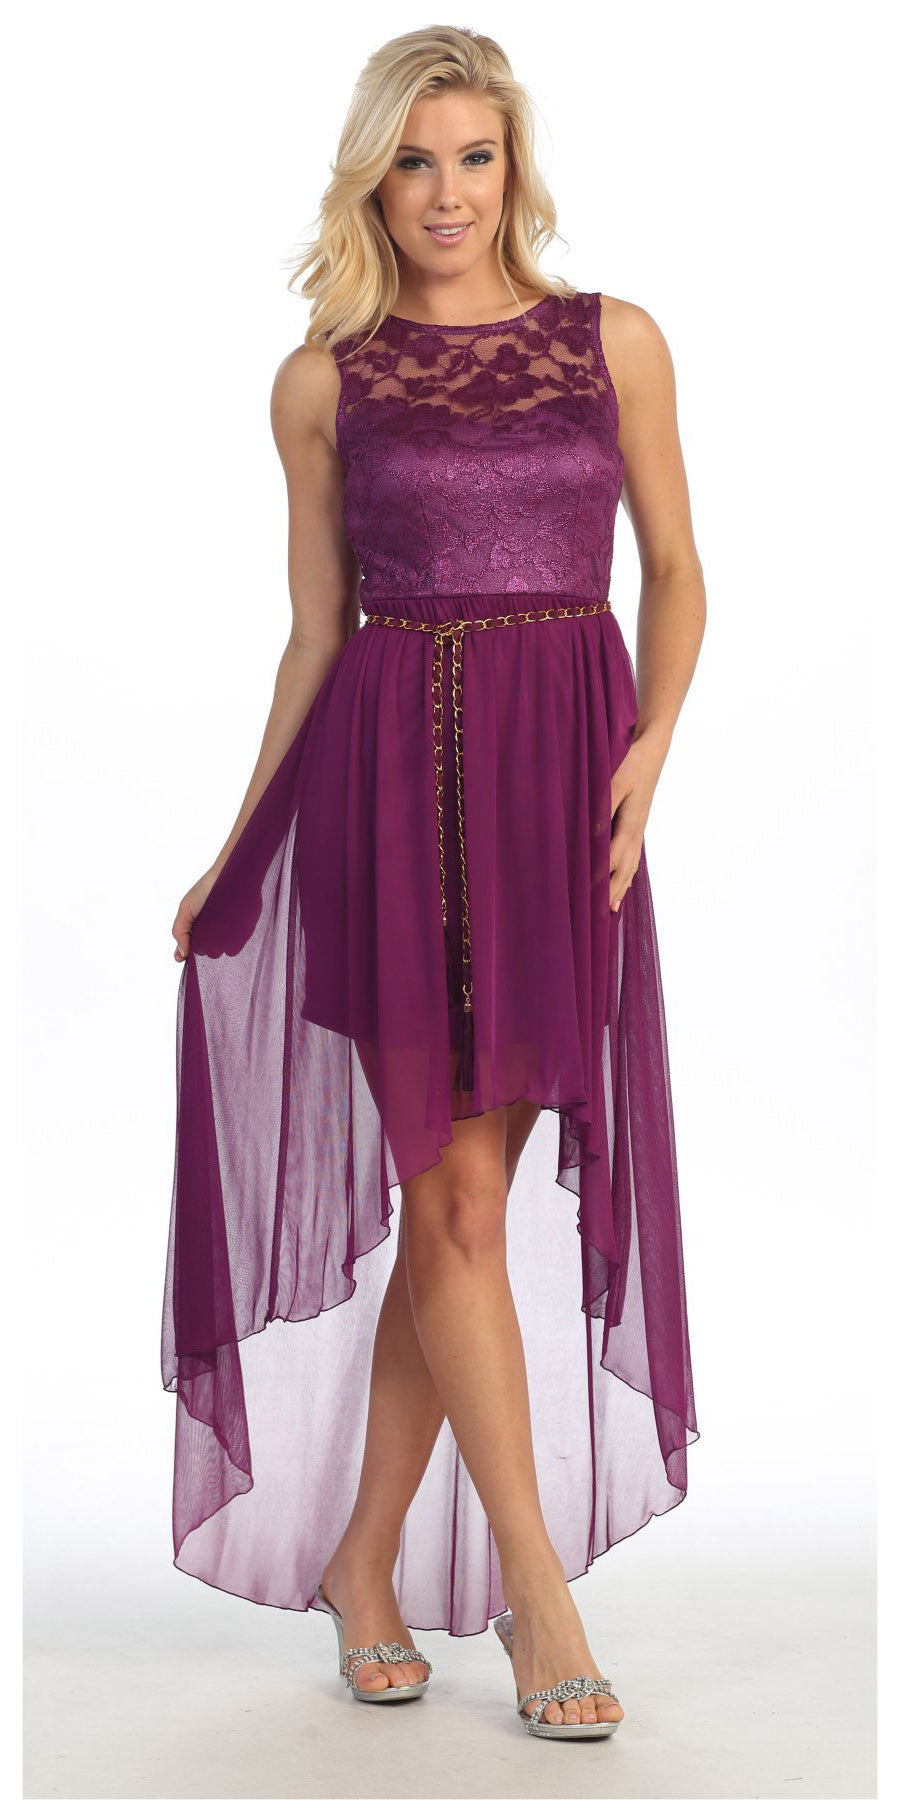 Bridesmaid High Low Wine Dress Lace Top Wide Strap Illusion Neck